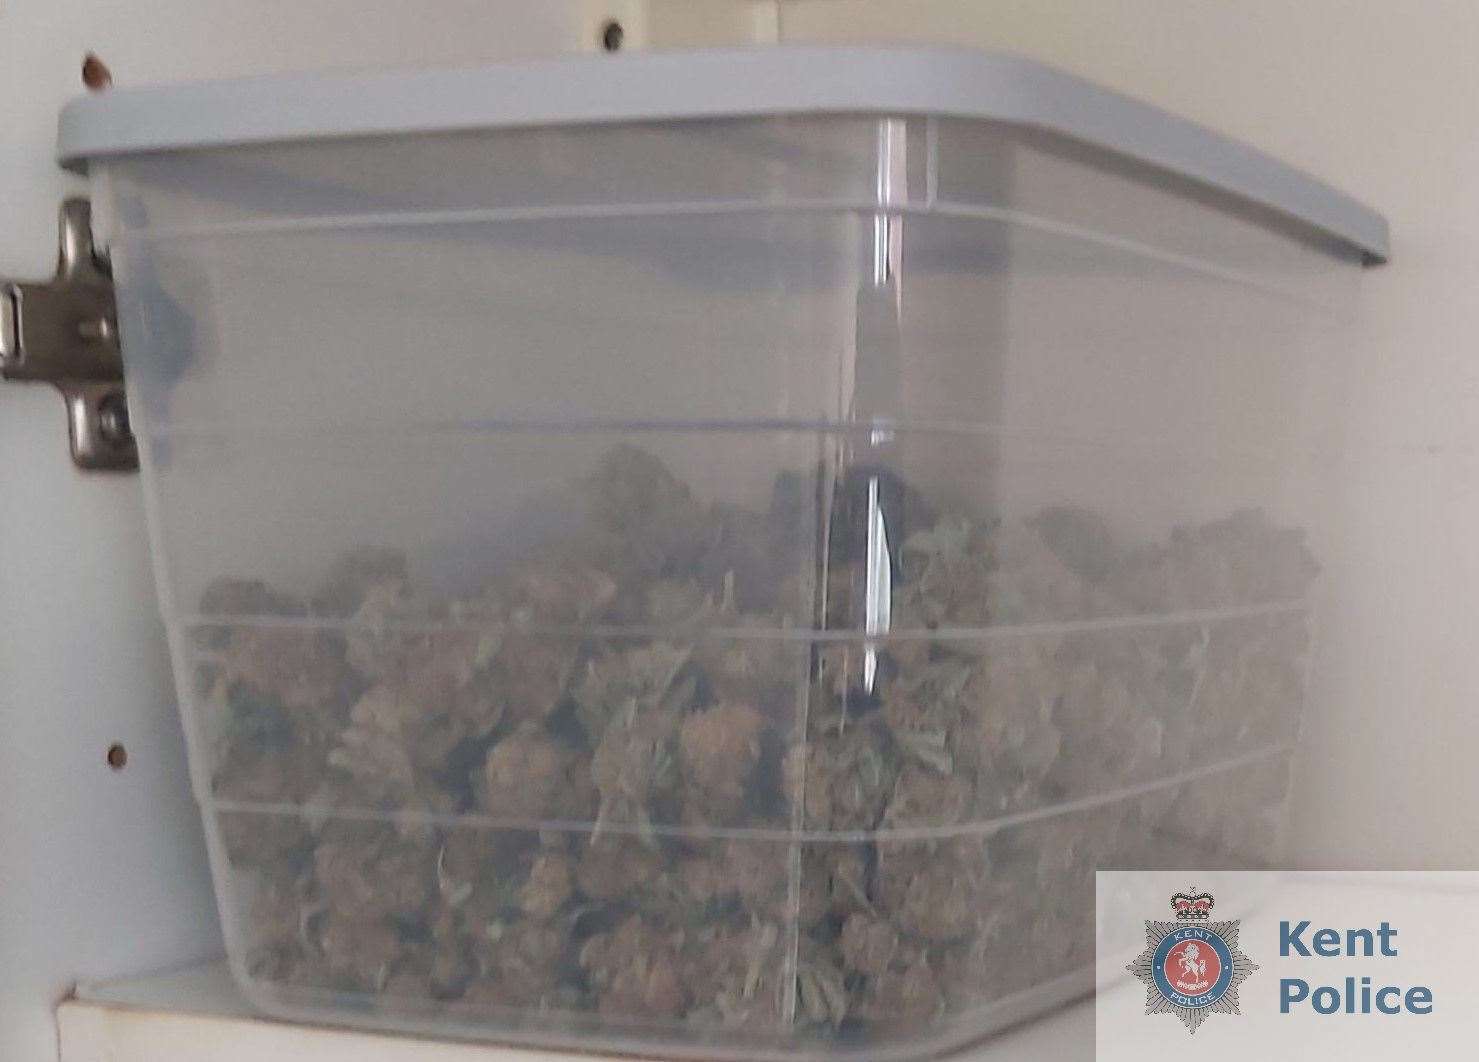 Cannabis was found at the Margate home. Picture: Kent Police